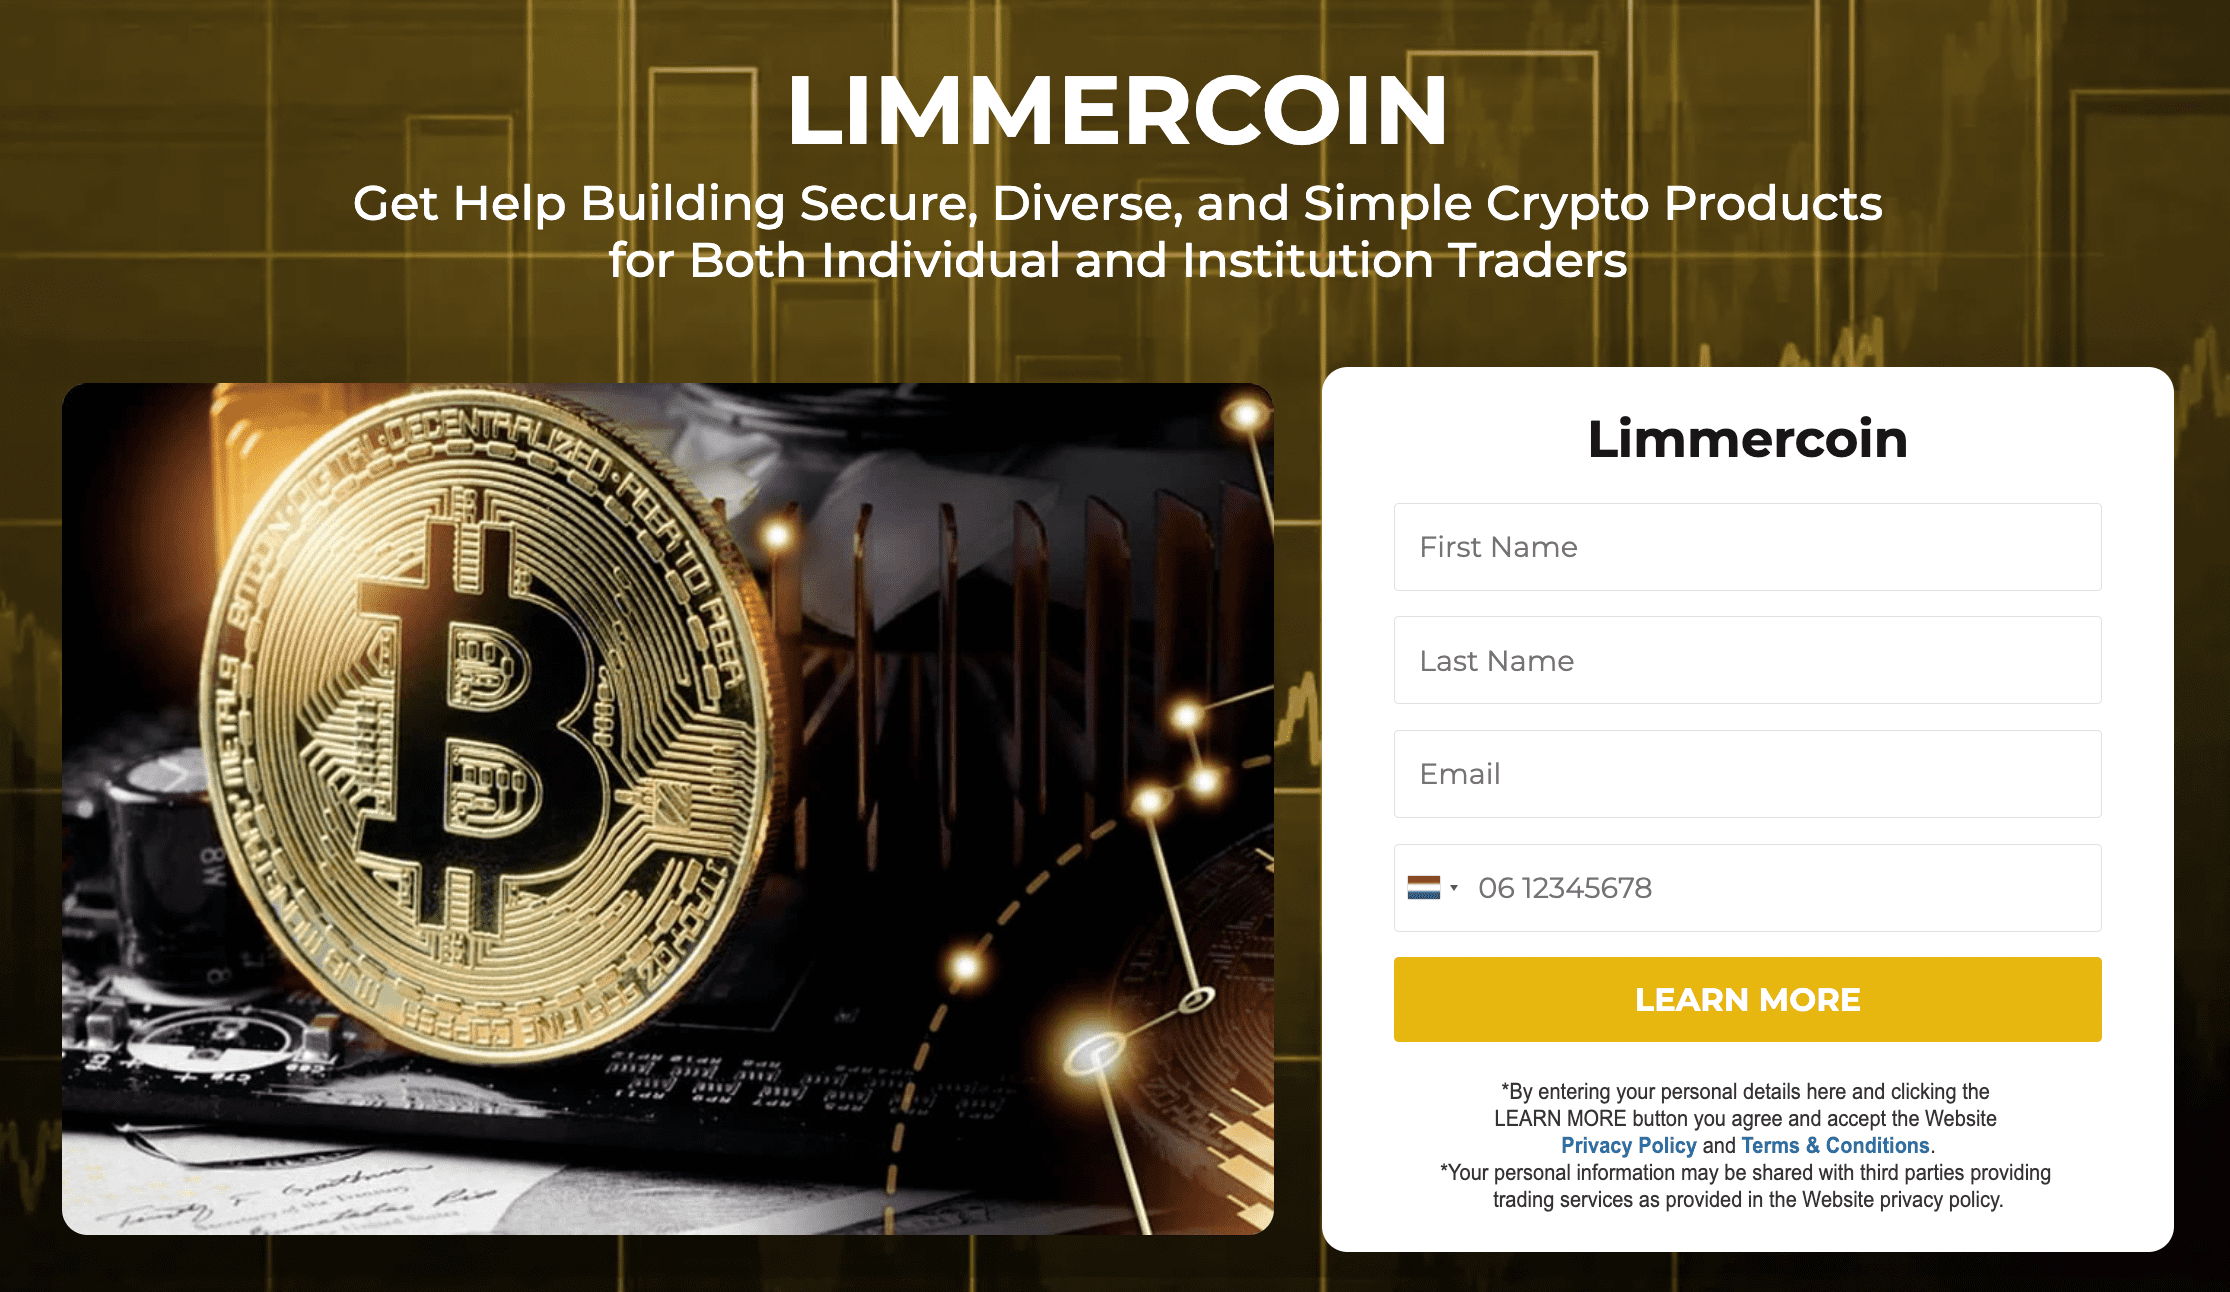 LIMMERCOIN main image.